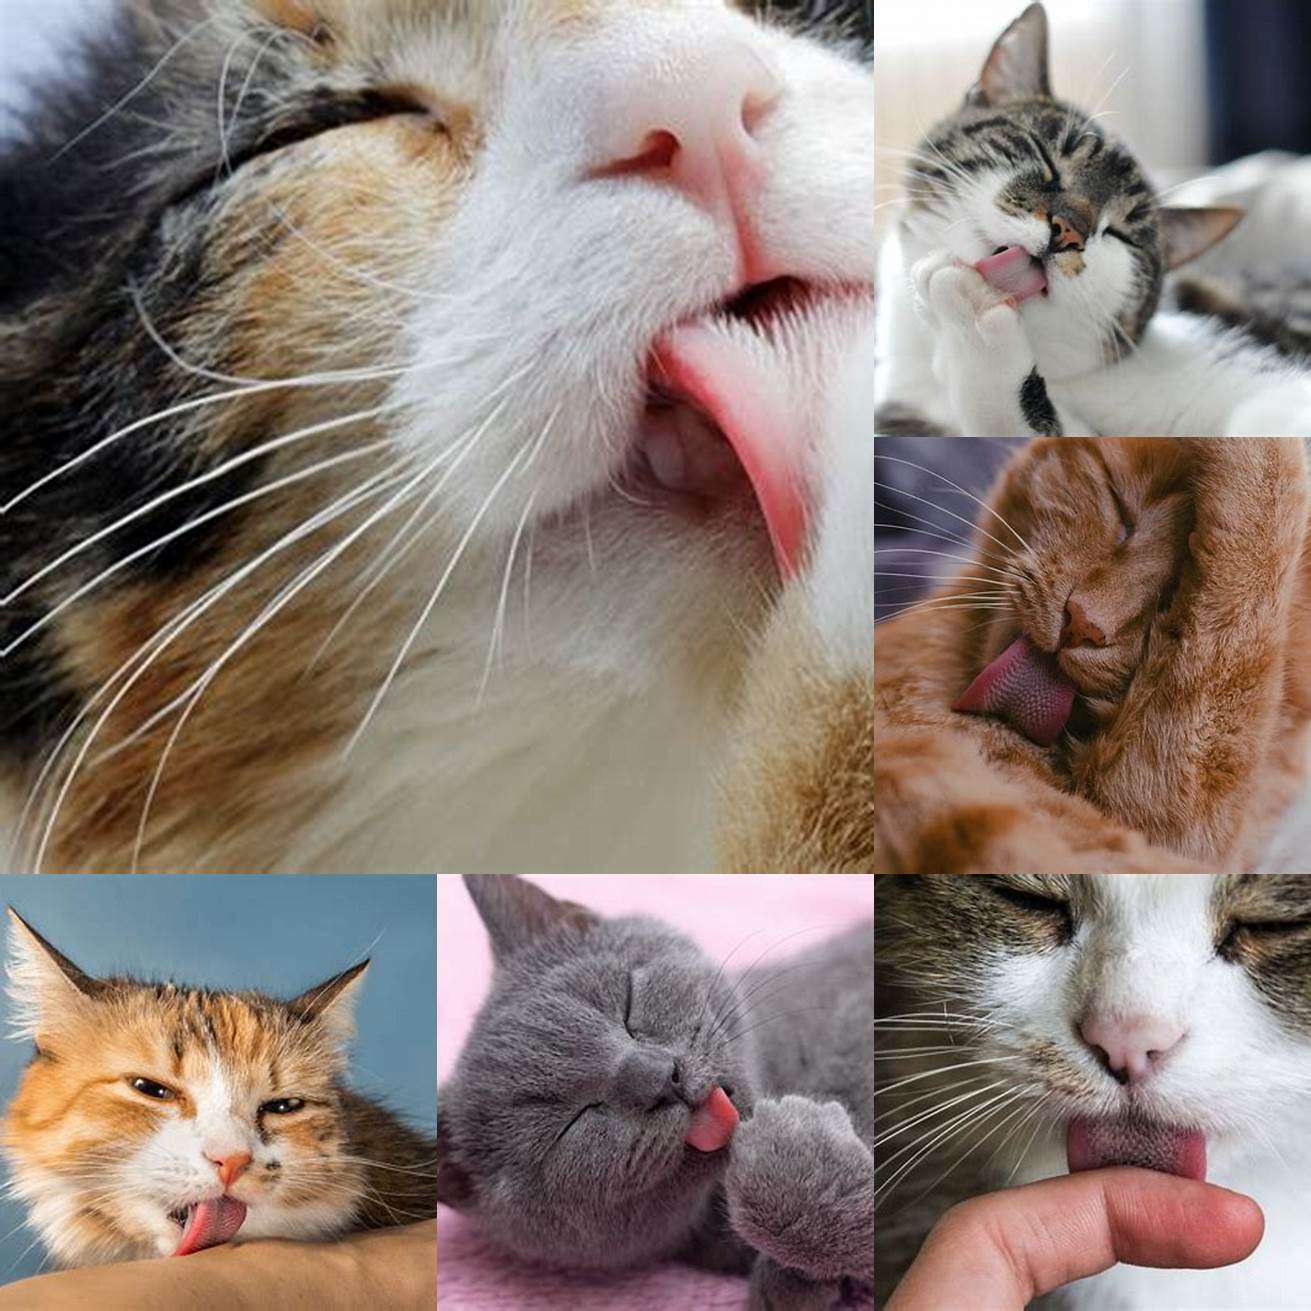 Licking Cats are fastidious groomers and may develop black spots on their tongue from licking and grooming themselves excessively